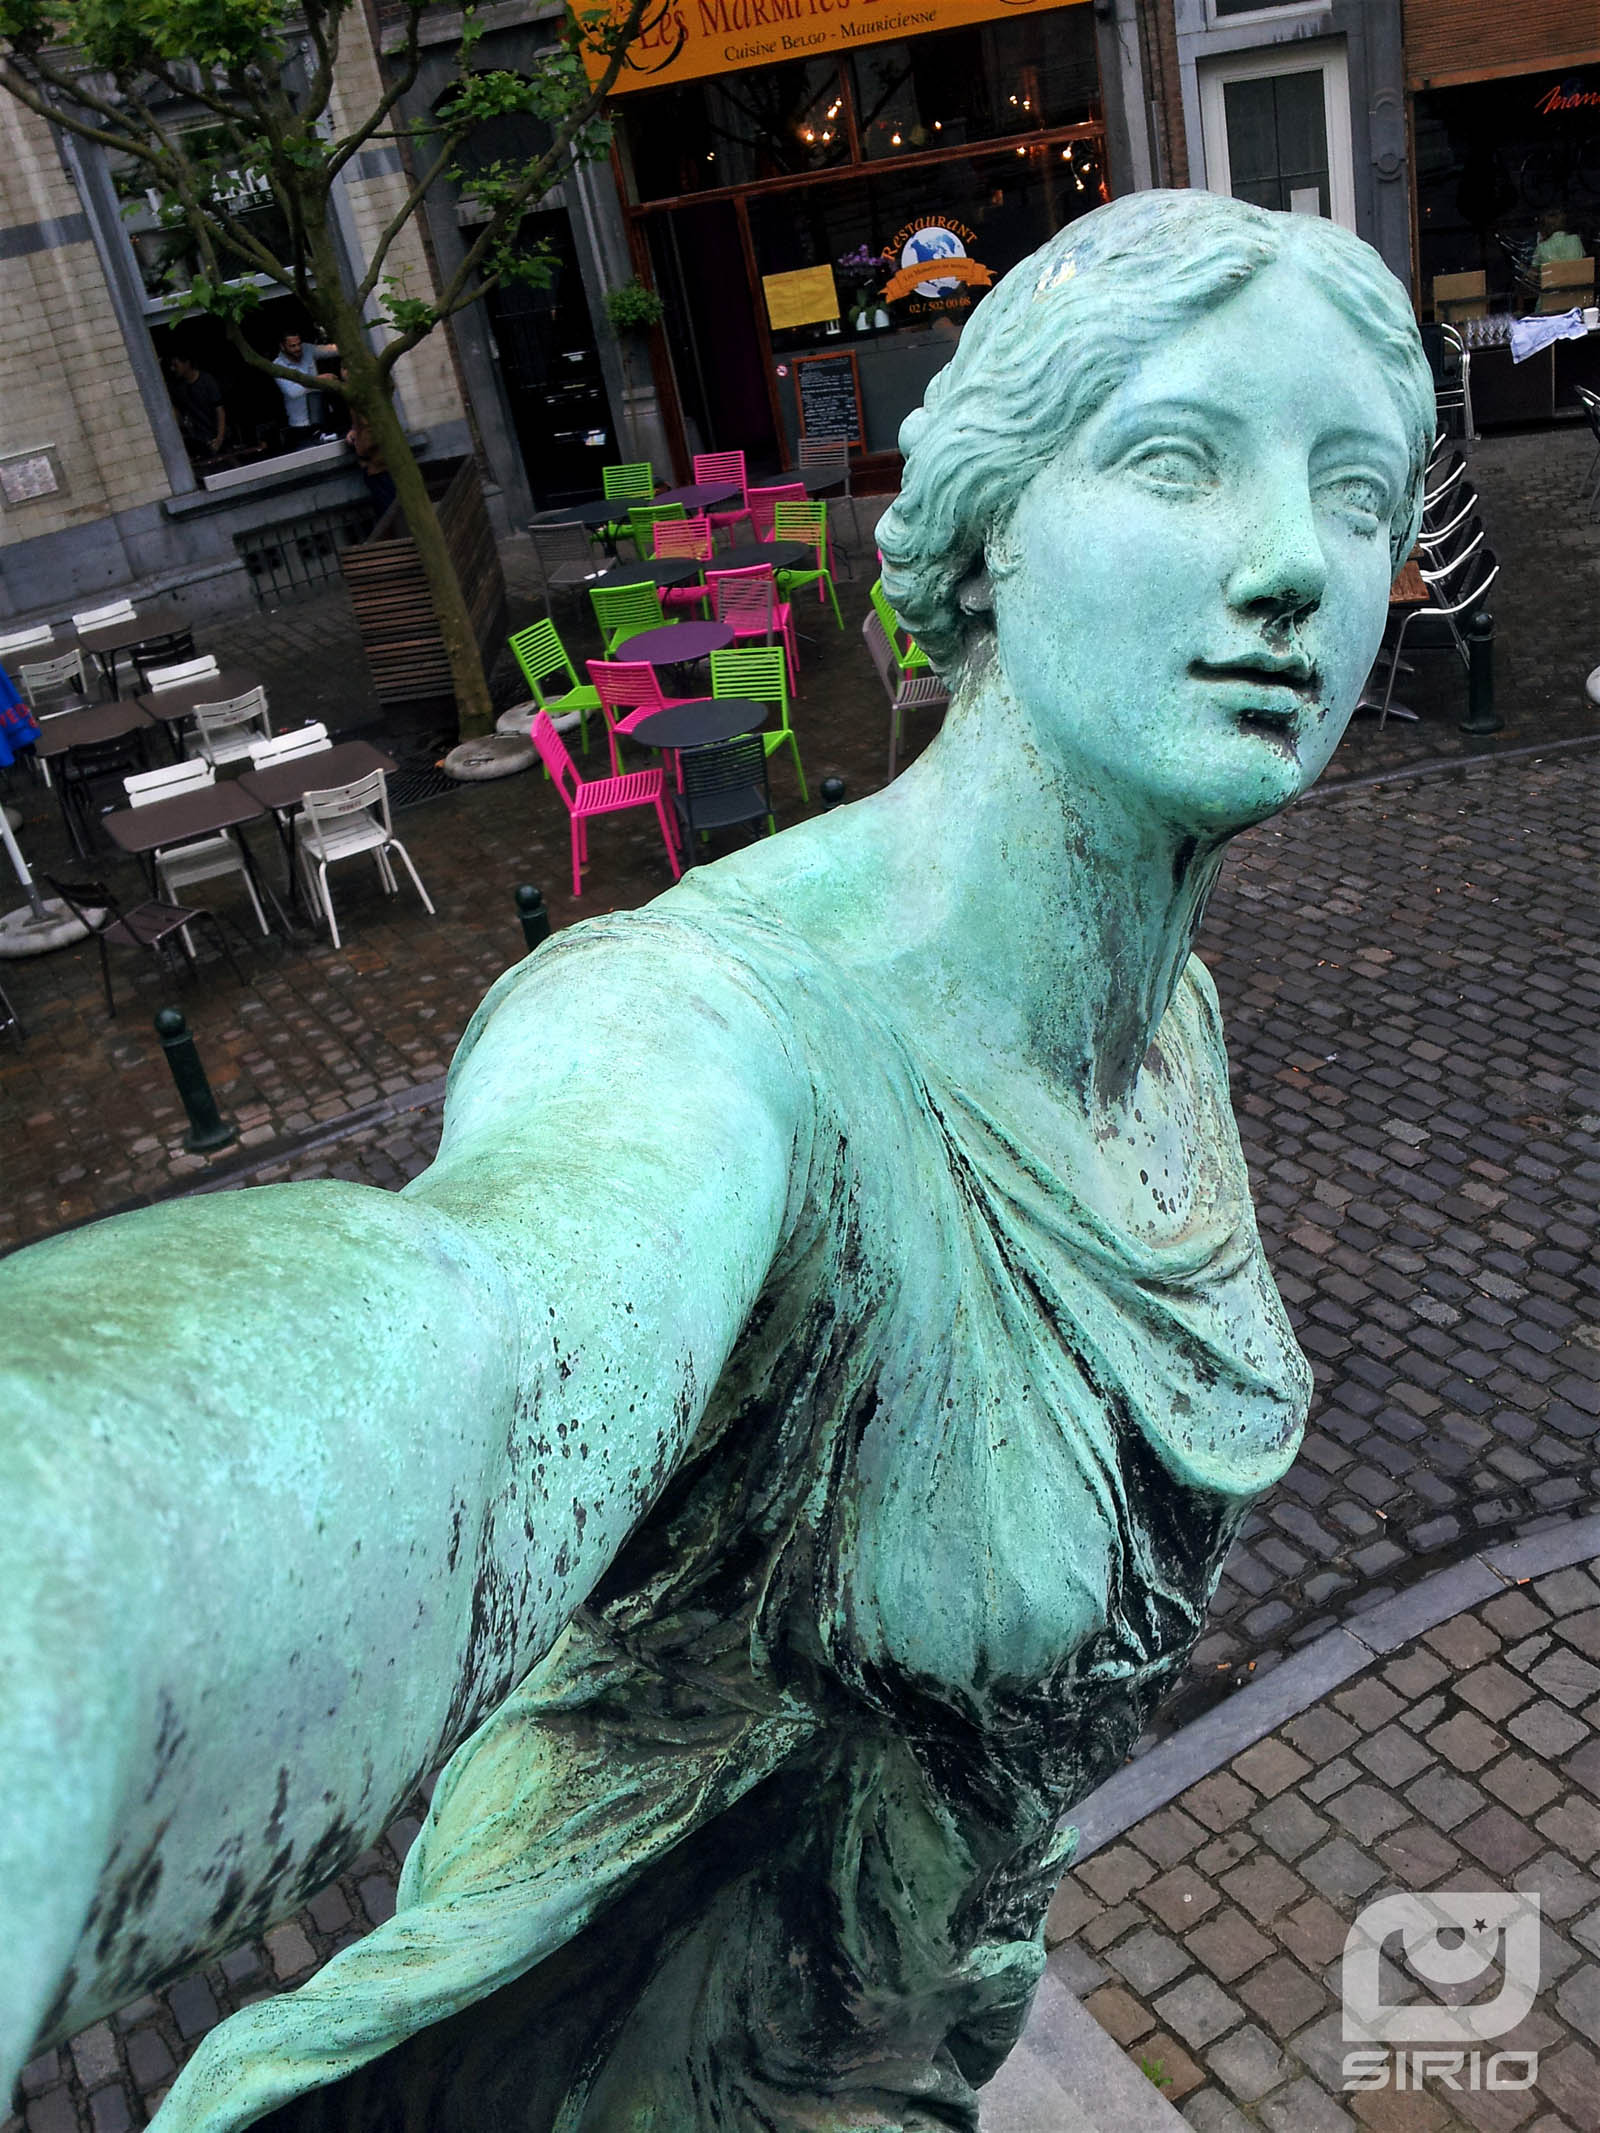 Statuary Selfie girl in front of a pub